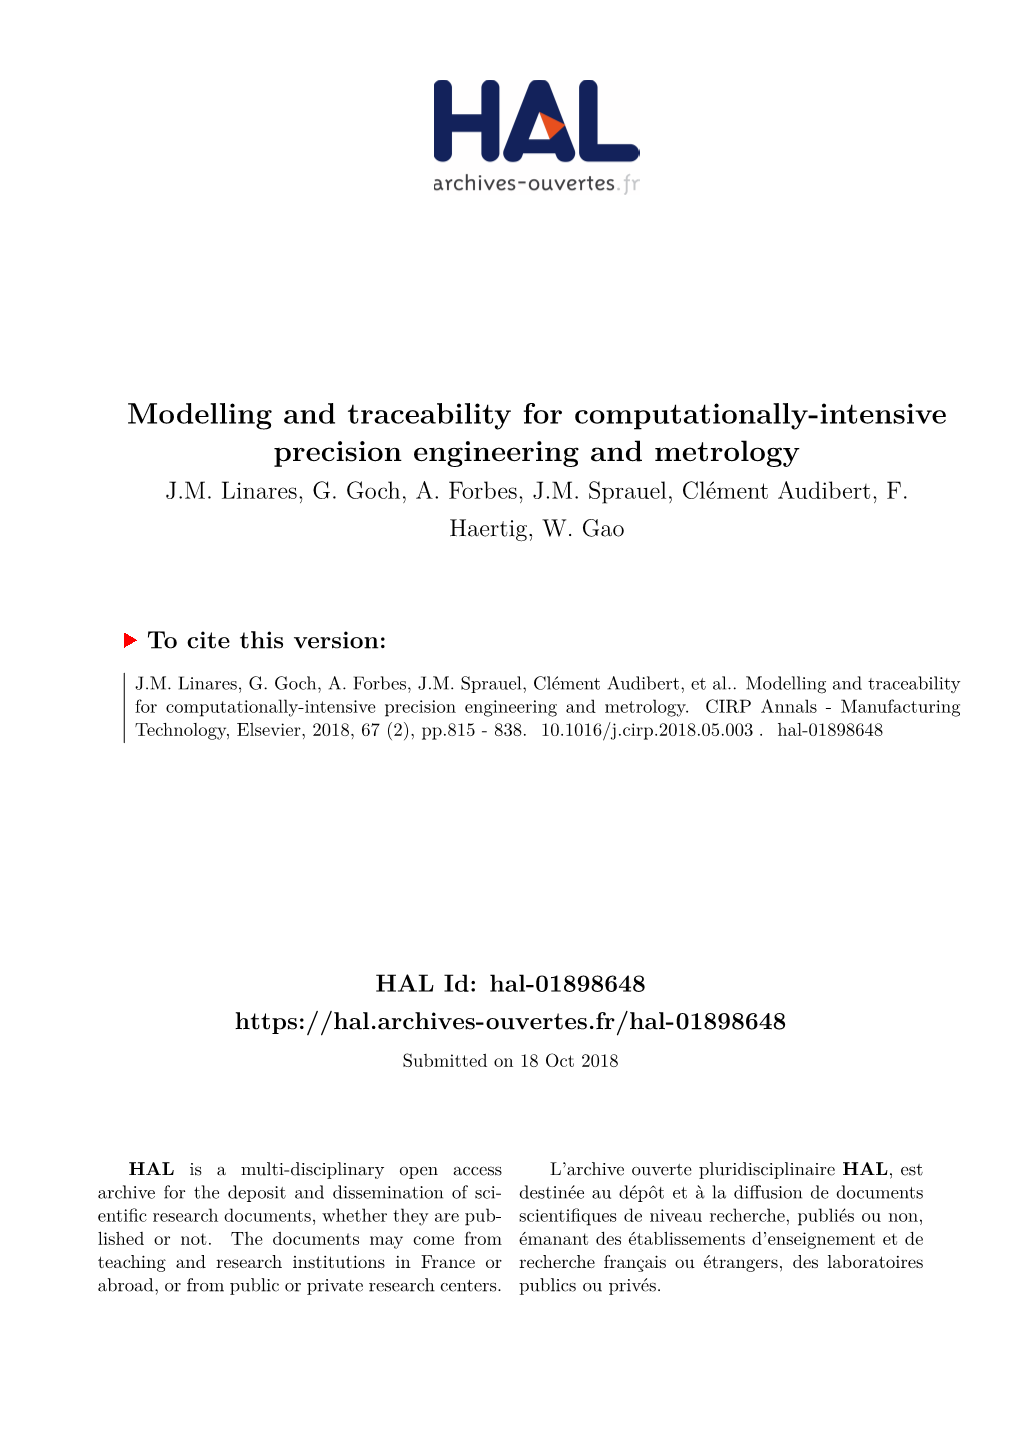 Modelling and Traceability for Computationally-Intensive Precision Engineering and Metrology J.M